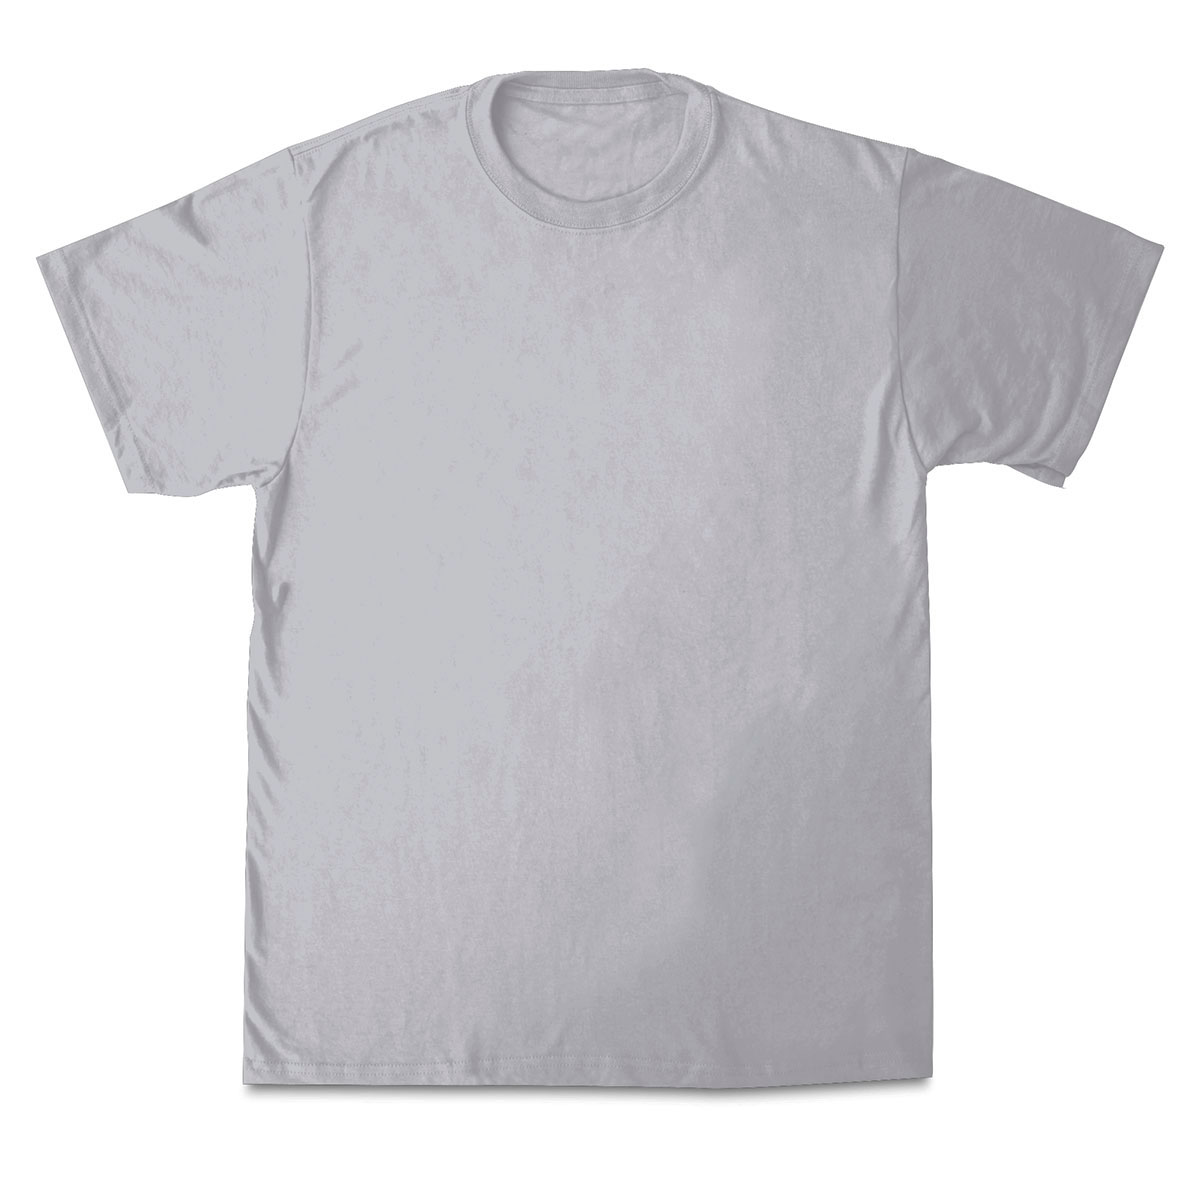 First Quality 50/50 T-Shirts - Adult Sizes | BLICK Art Materials